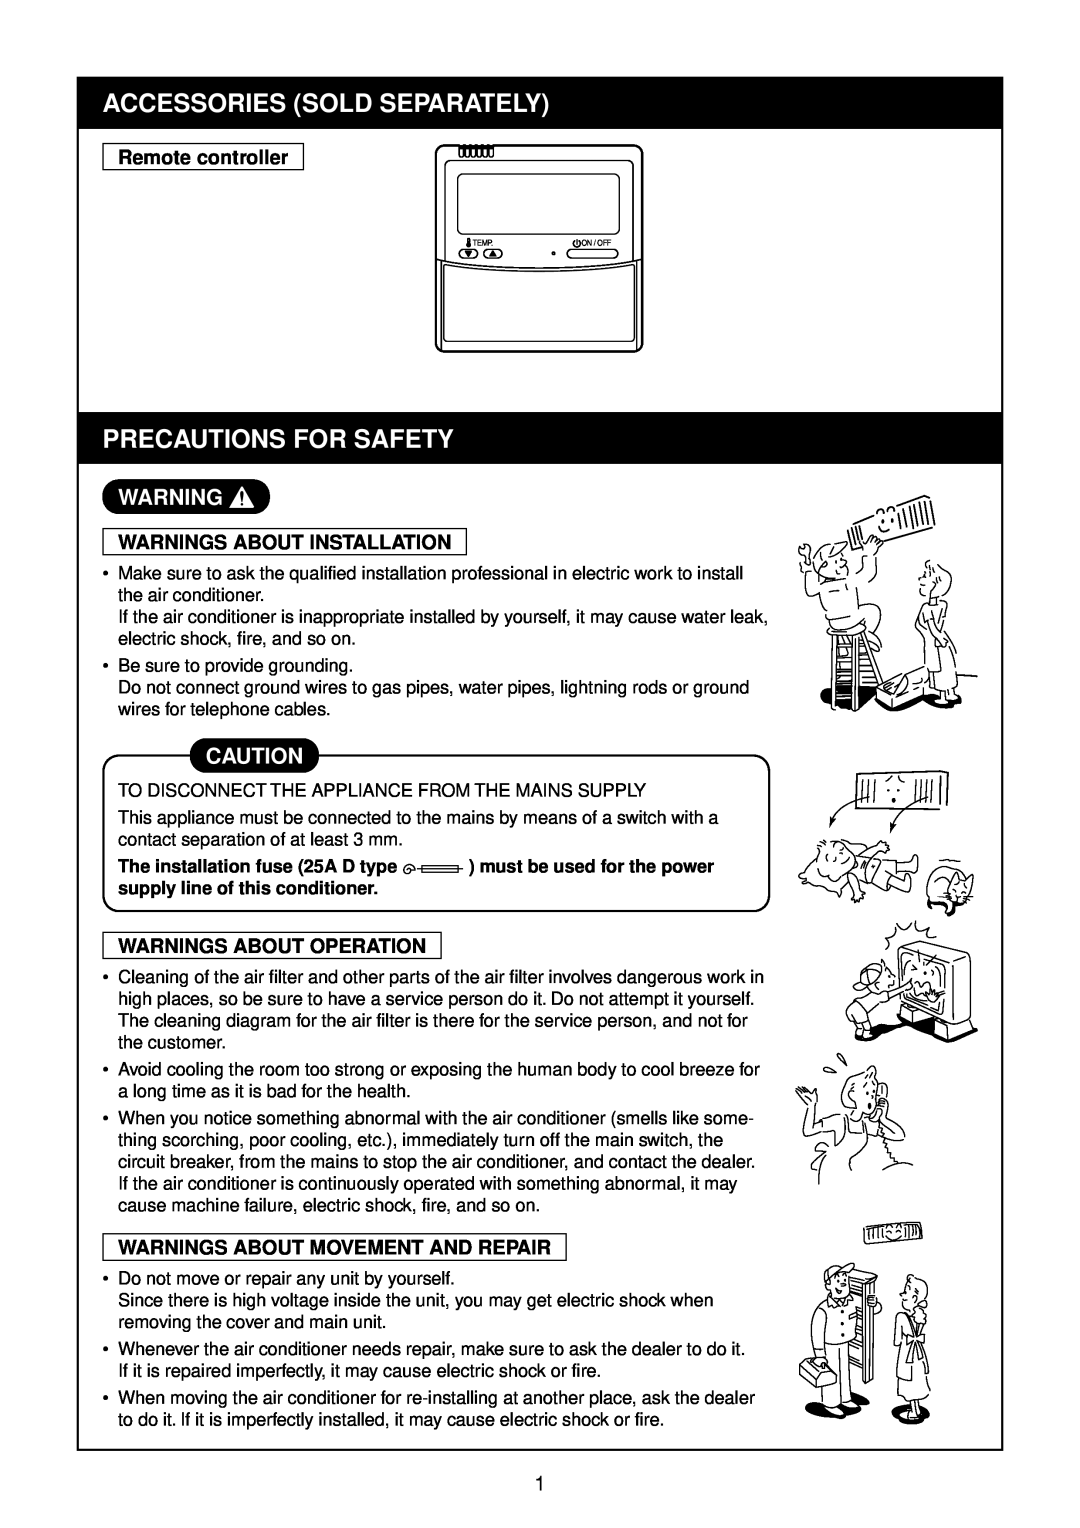 Toshiba SP1402AT-E Accessories Sold Separately, Precautions For Safety, Remote controller, Warnings About Installation 